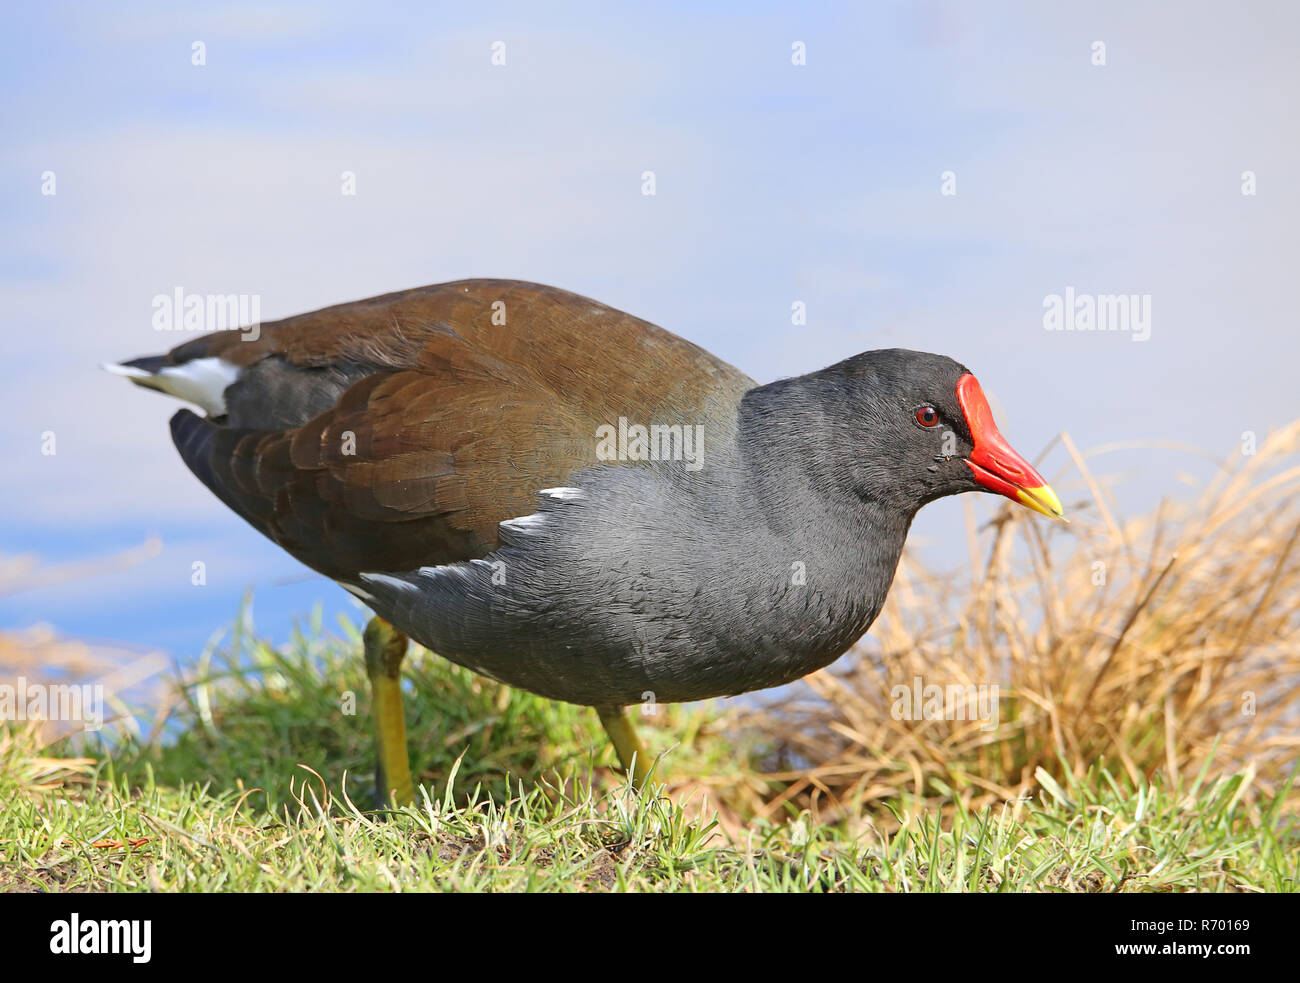 green-footed moorhen or gallinula chloropus pond rail in the city park Stock Photo